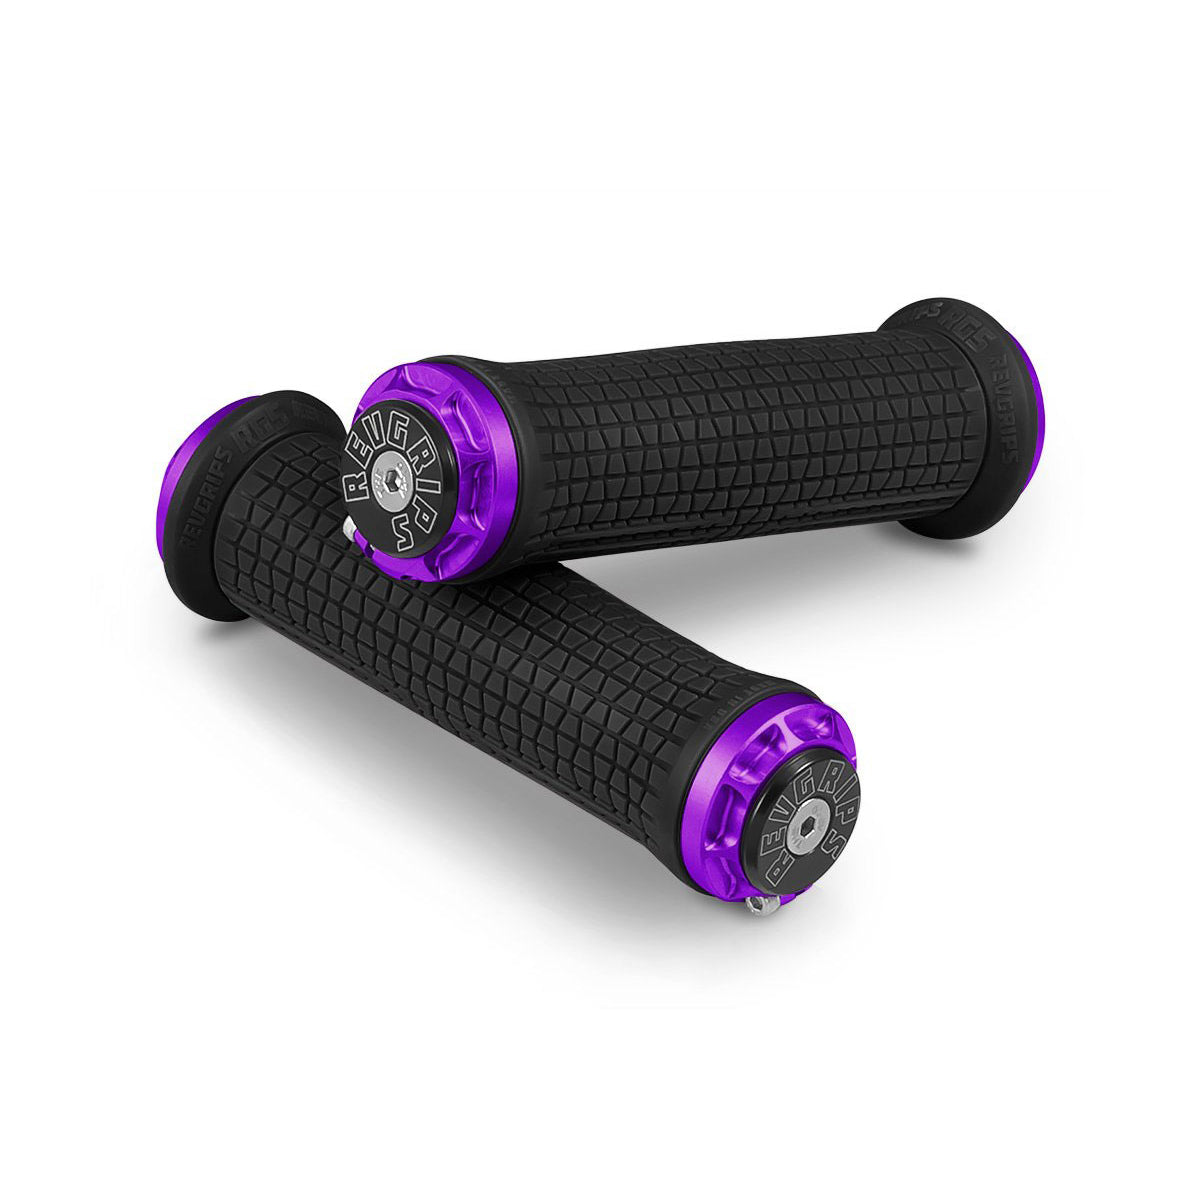 RevGrips Pro Series Grips - Black With Purple Clamps - RG7